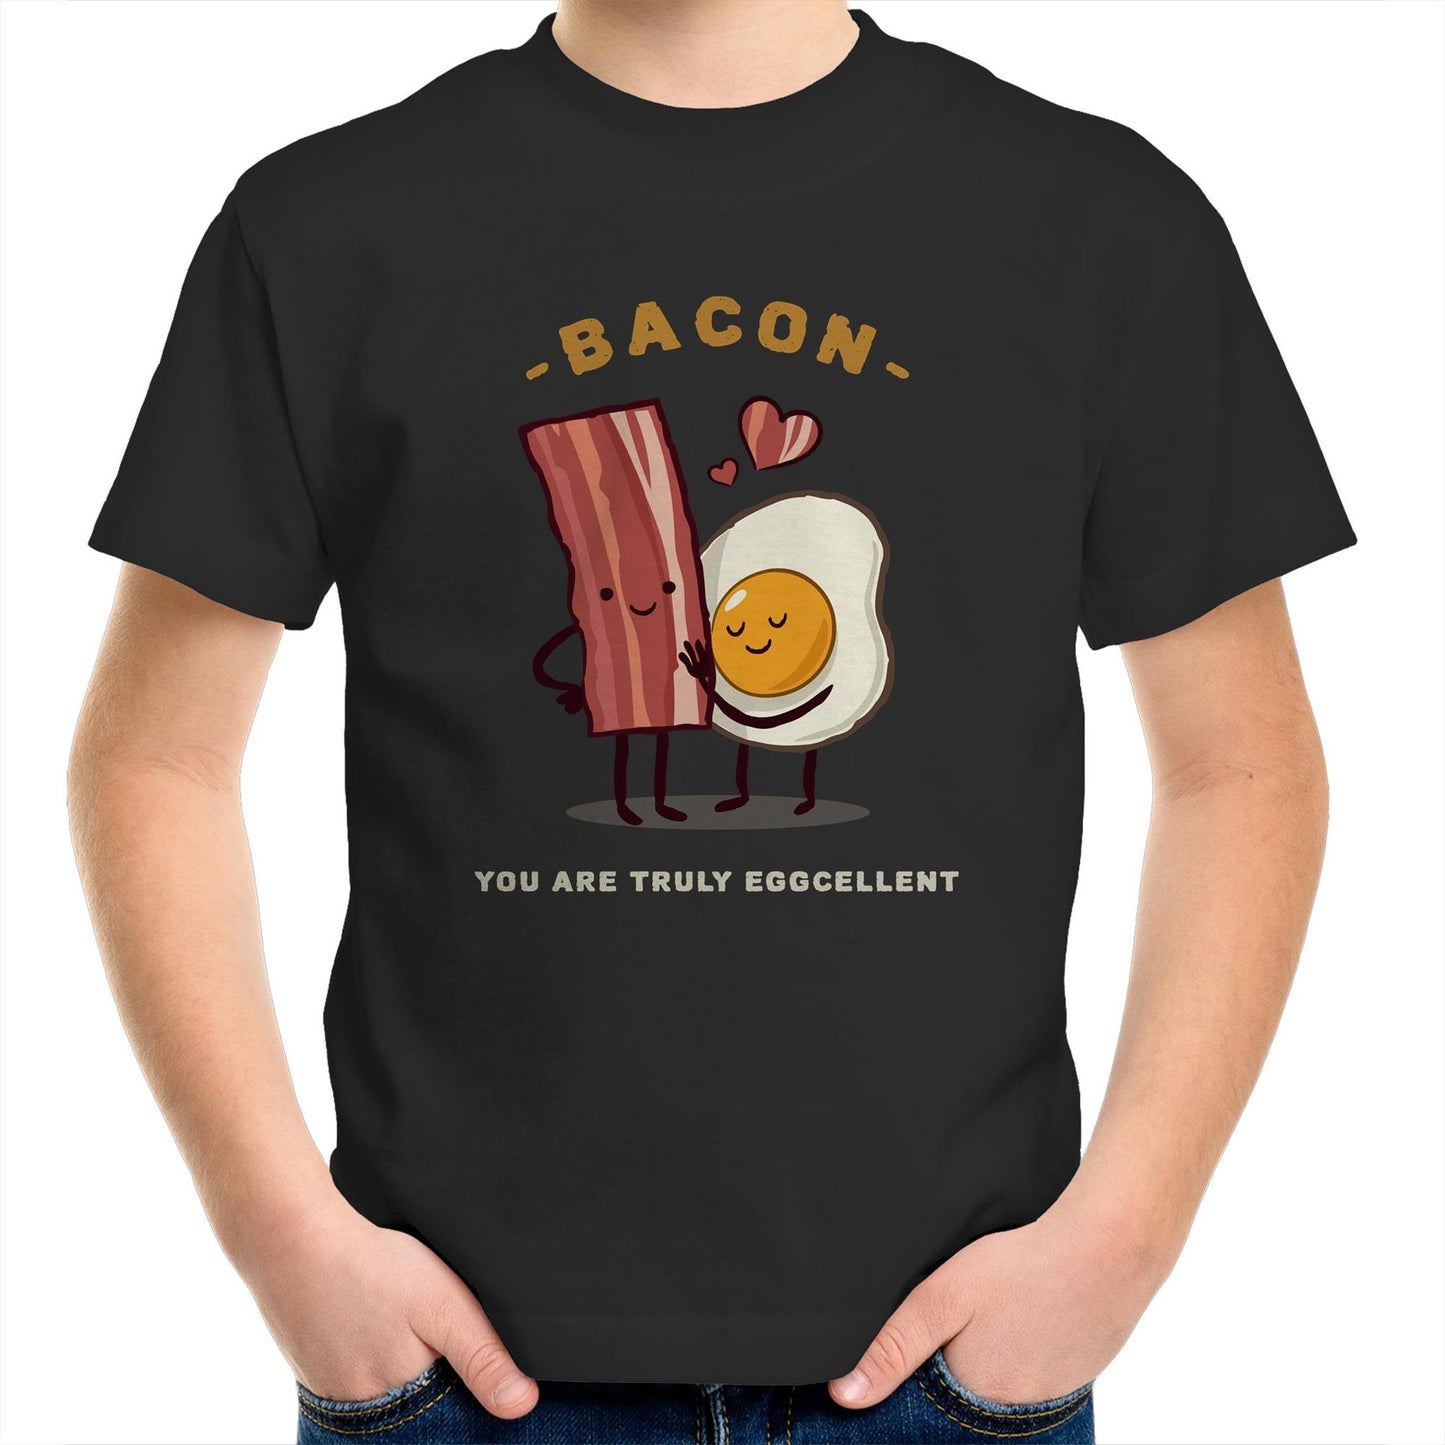 Bacon, You Are Truly Eggcellent - Kids Youth T-Shirt Black Kids Youth T-shirt Food